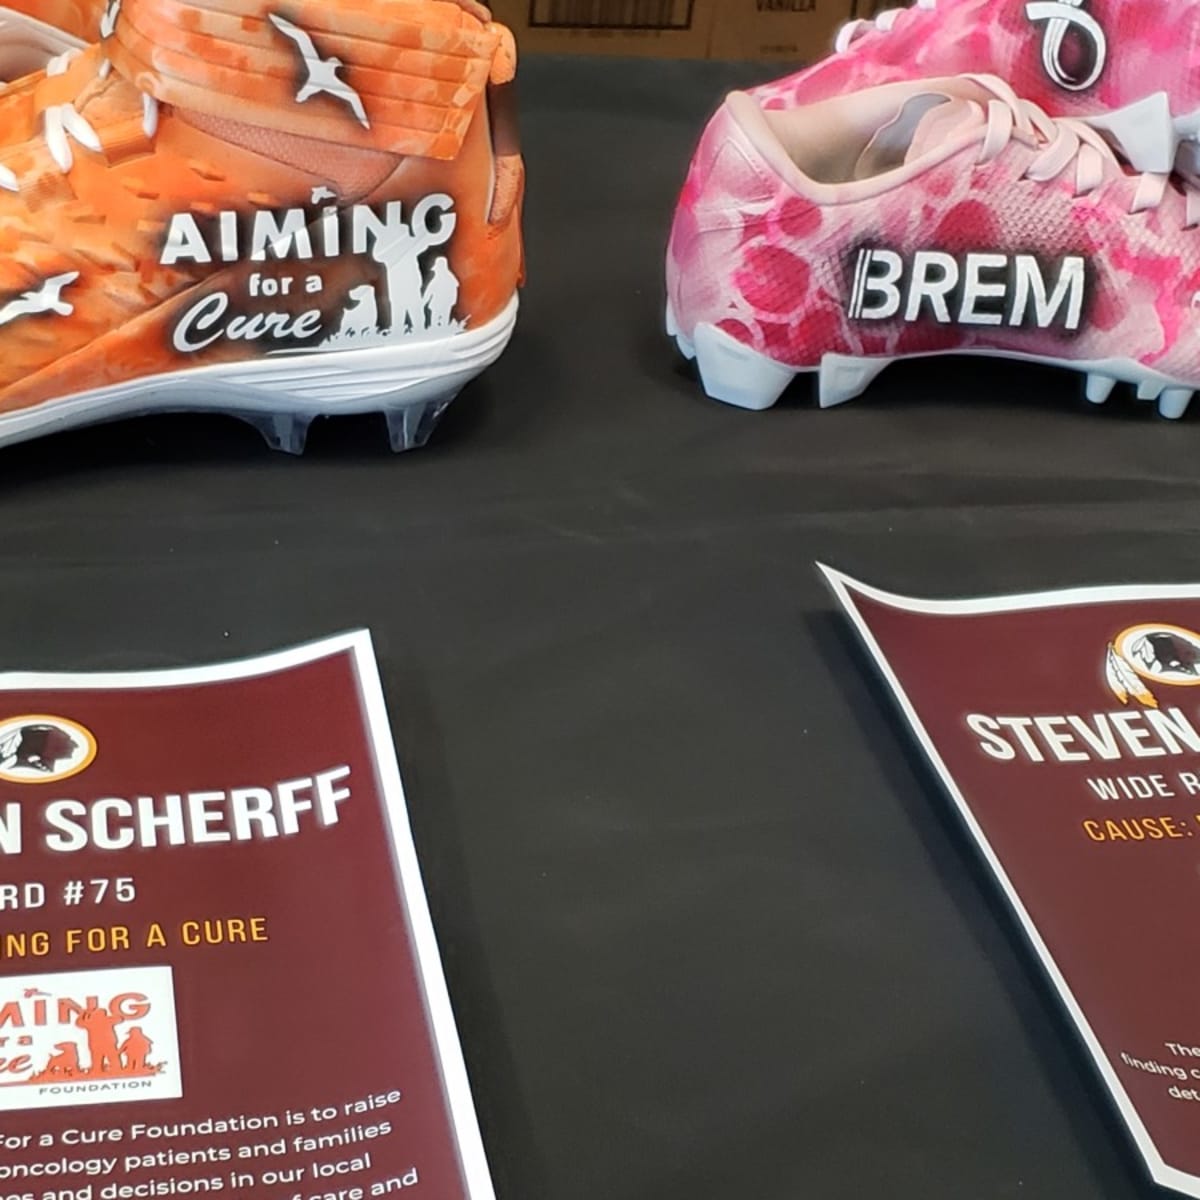 My Cause, My Cleats Recap: Washington Raises More Than $35,000 For Charities